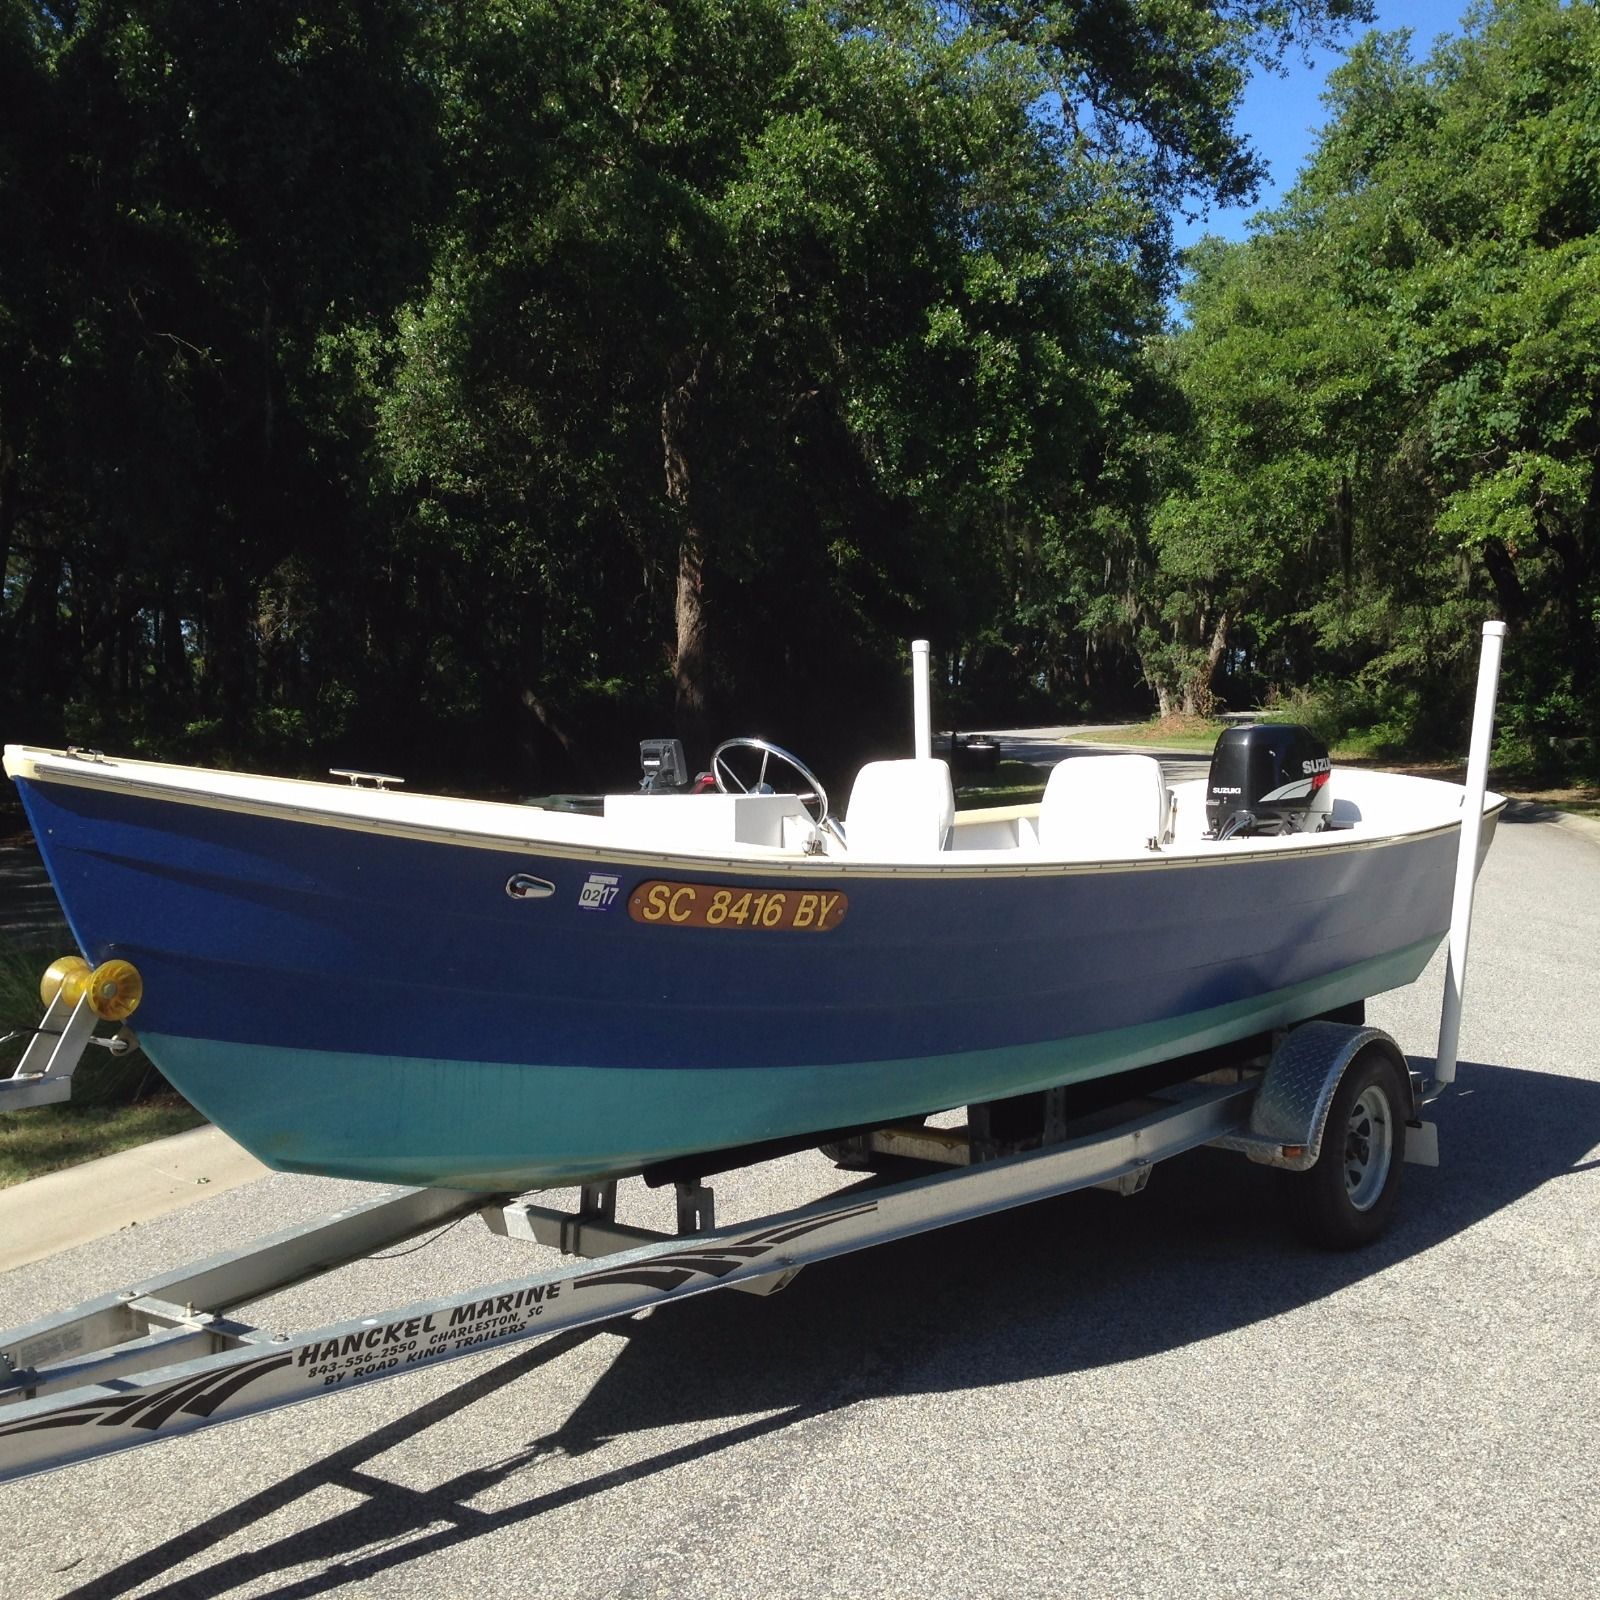 Simmons Sea Skiff 1969 for sale for $12,000 - Boats-from 